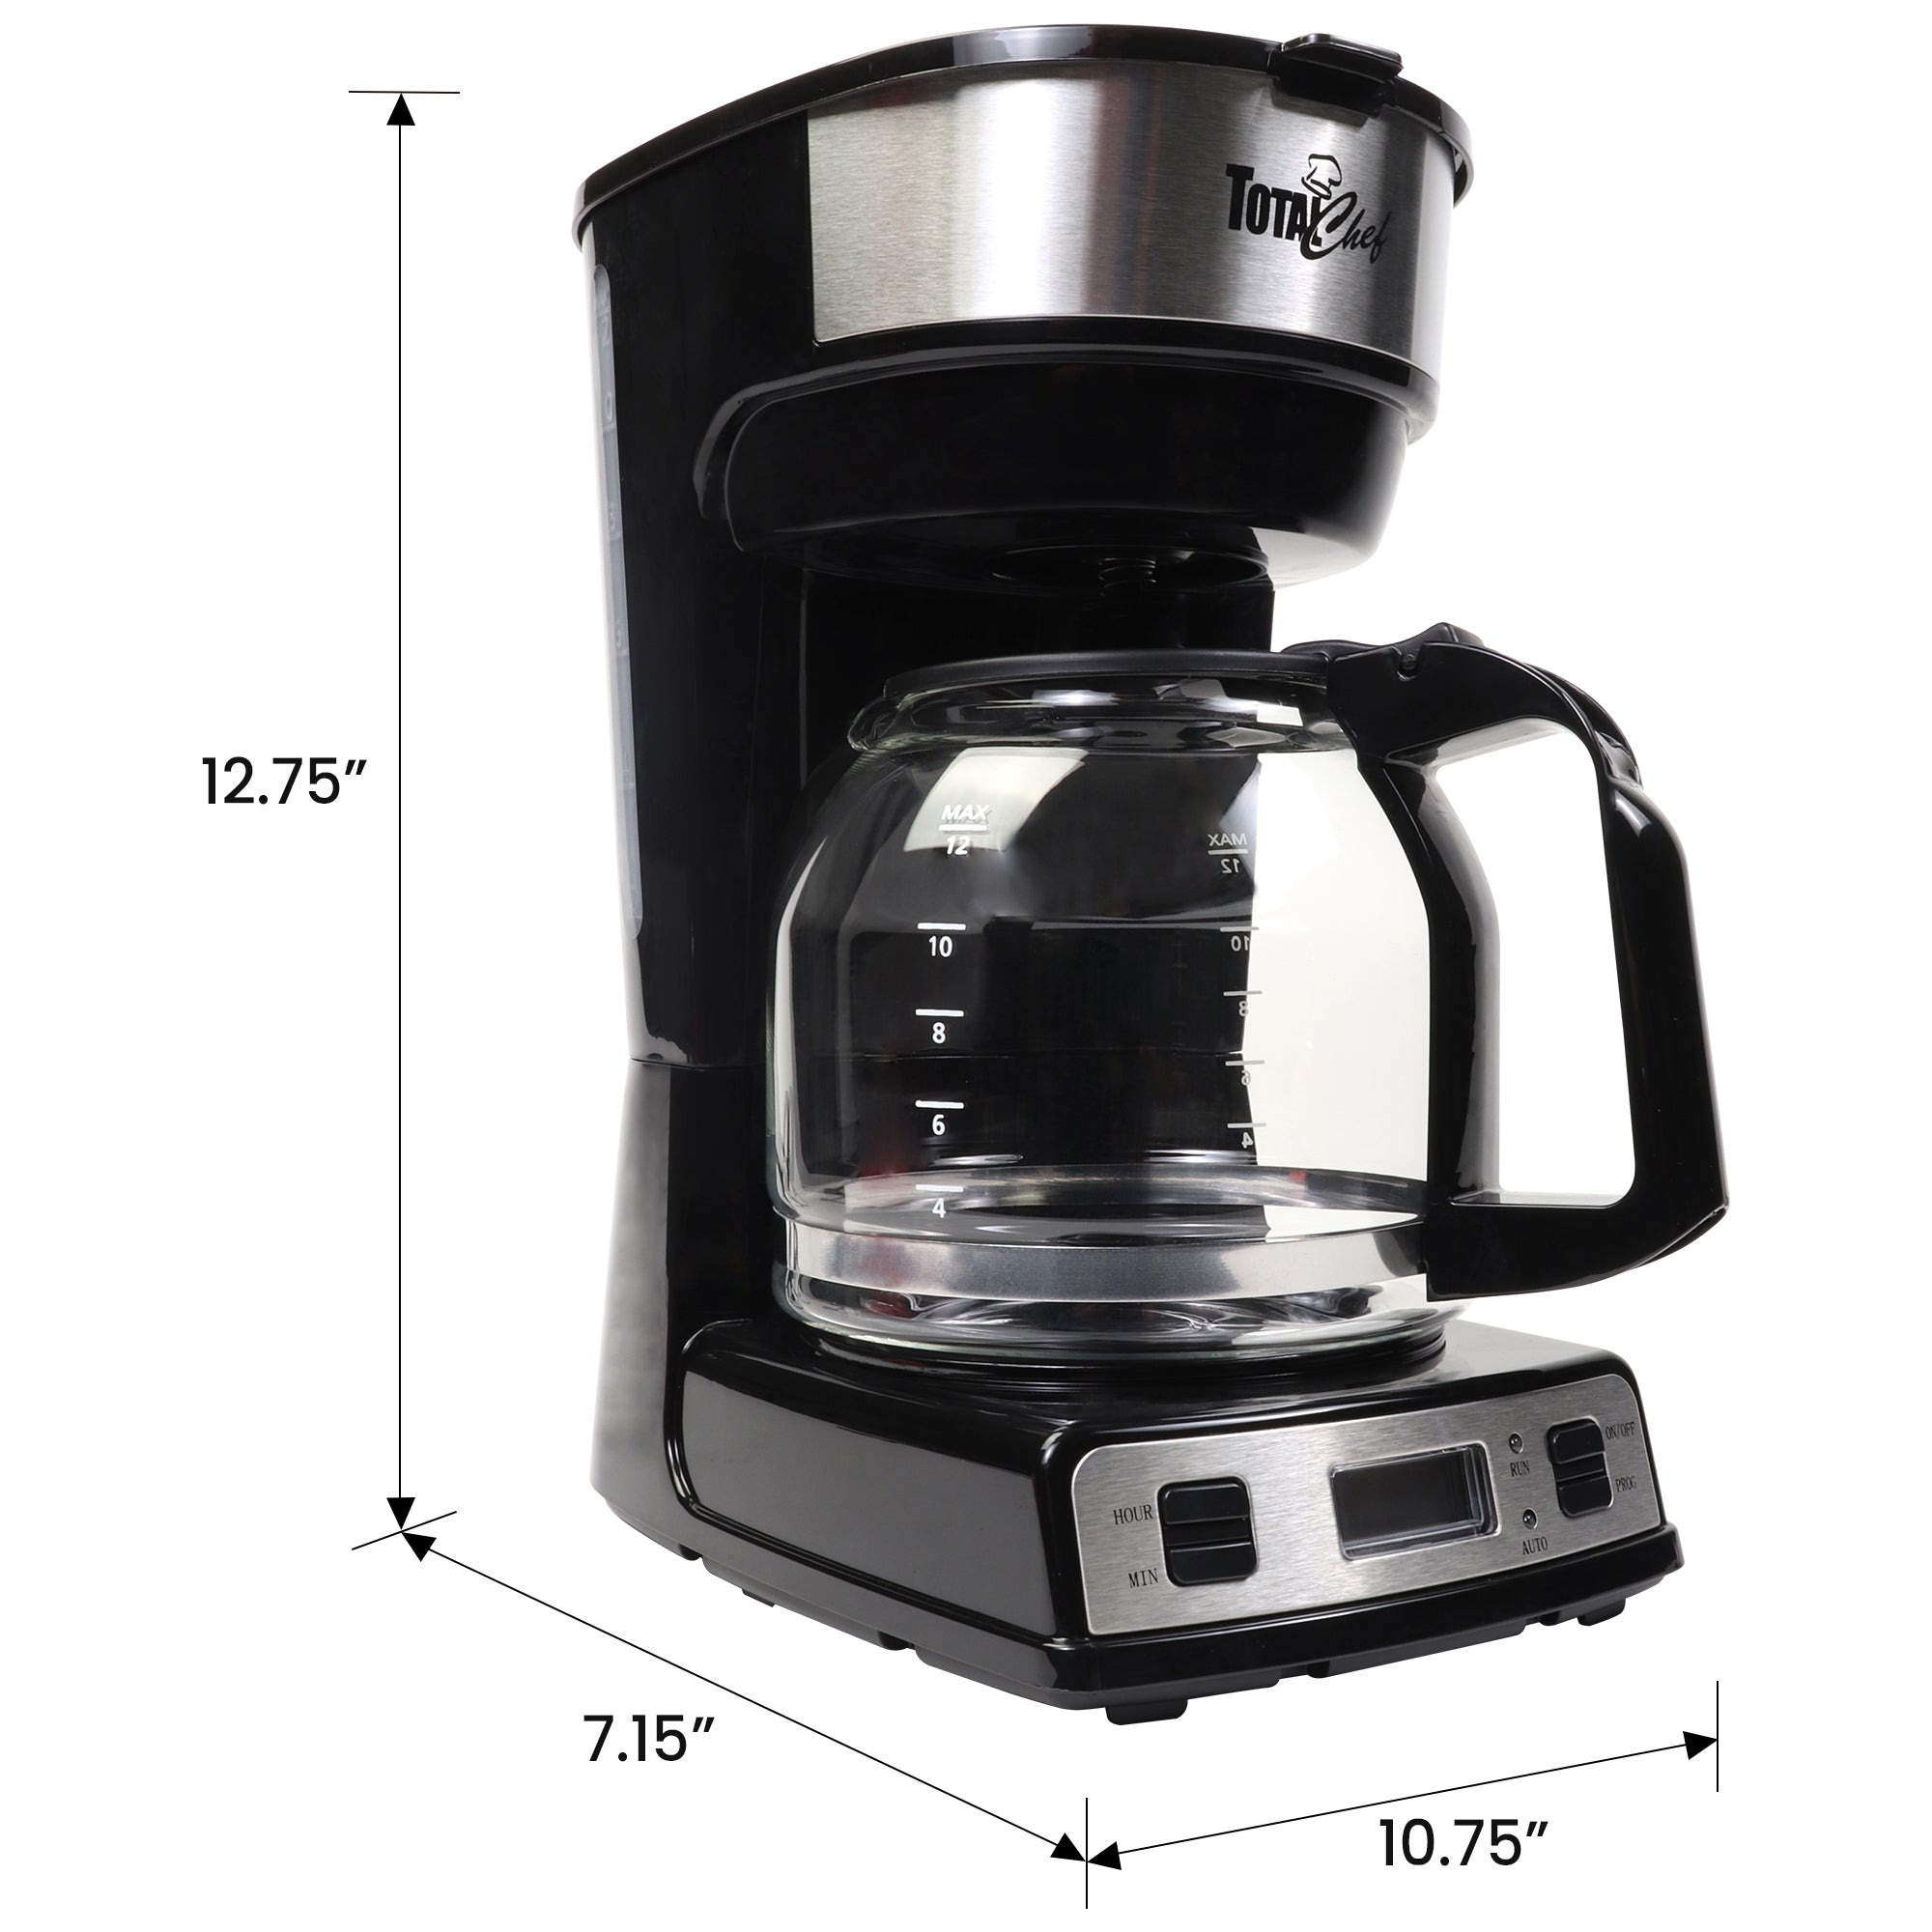 Product shot of programmable coffee maker on white background with dimensions labeled